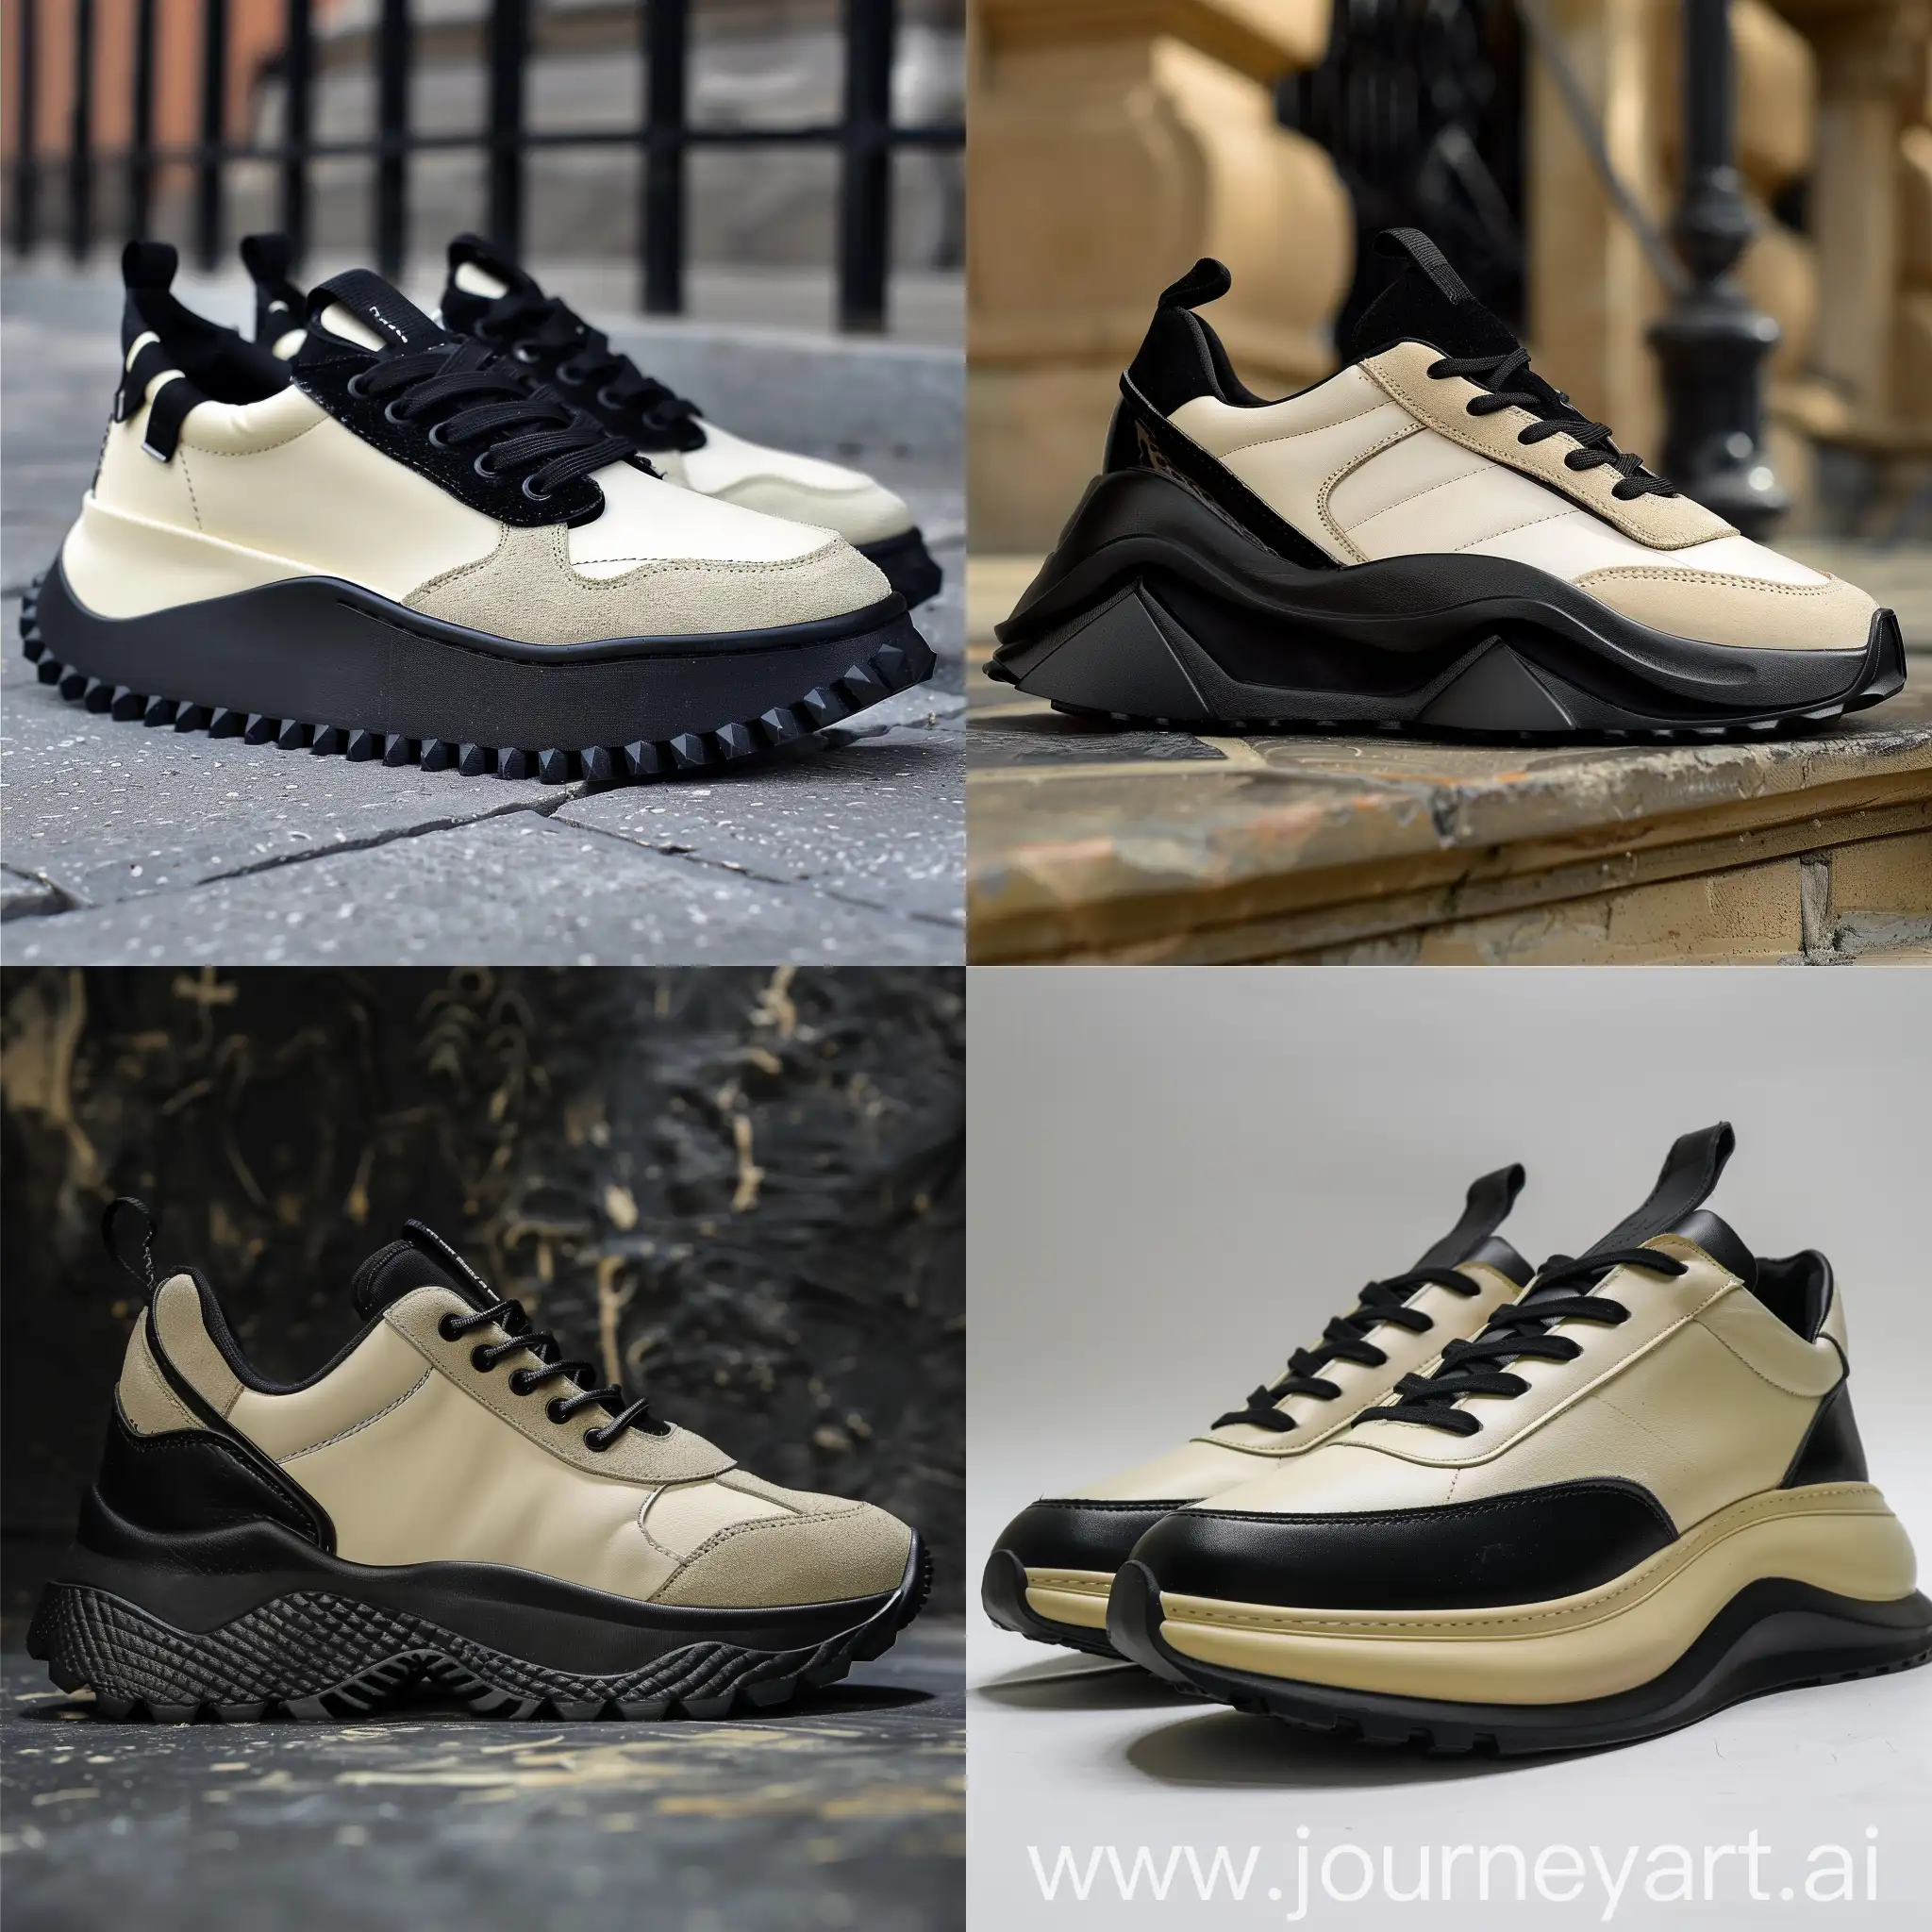 Sneakers design , inspiration by Ancient Egypt cultureand turtle shape , big chunky rubber midsole , black midsole , chunky , trendy , color black/cream , verne black line around the top of sneakers 